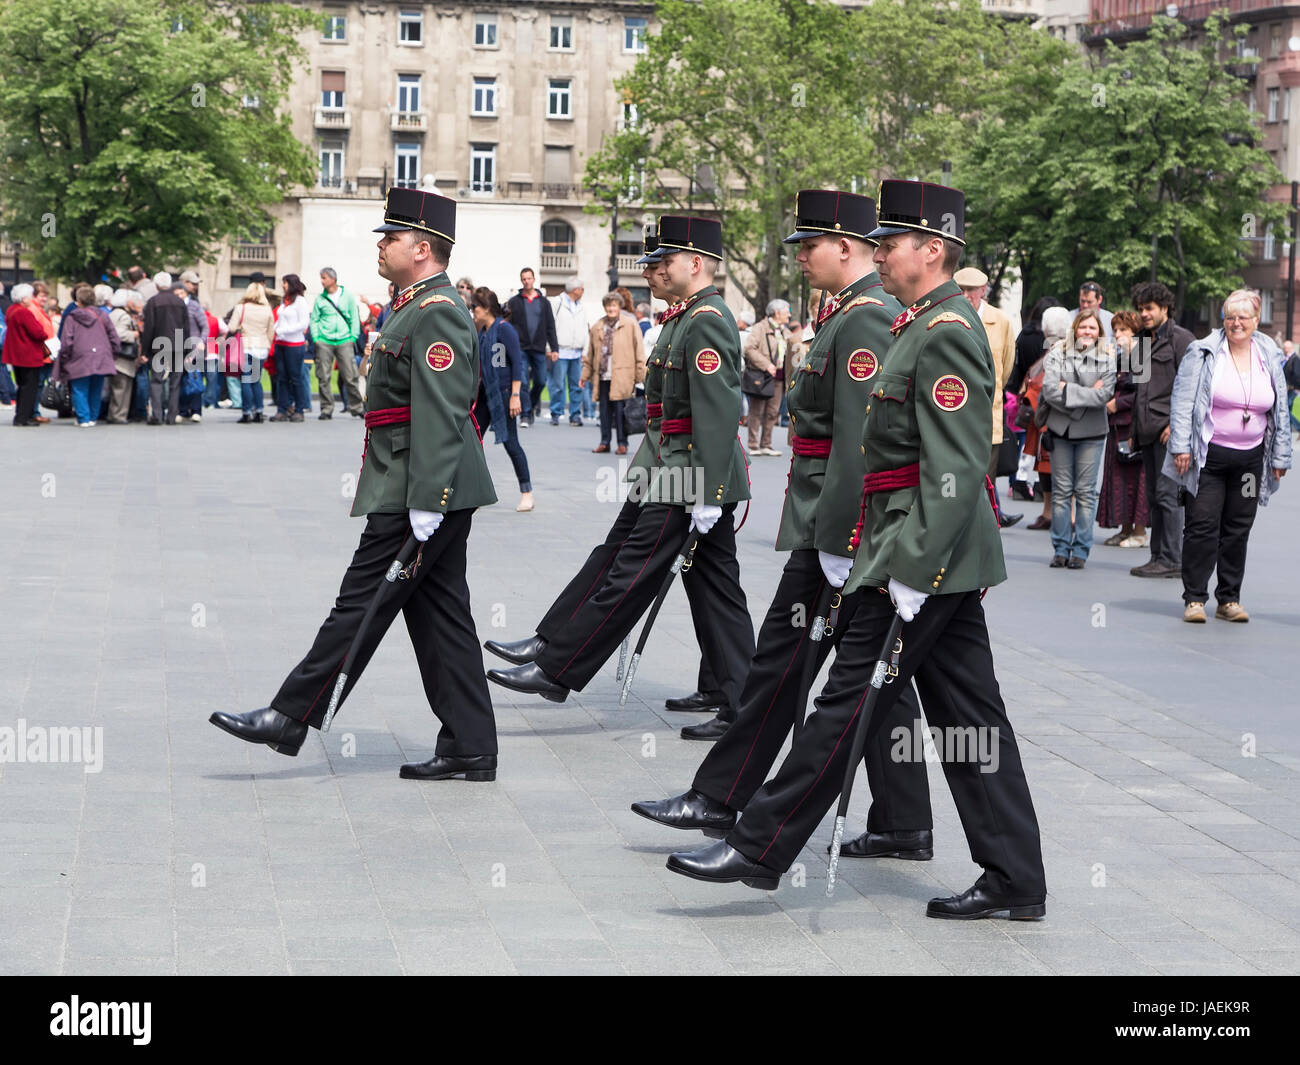 BUDAPEST, HUNGARY - 03 MAY 2014: Presentation of the guard of honor near the parliament building on 03 may 2014. Budapest. Hungary Stock Photo